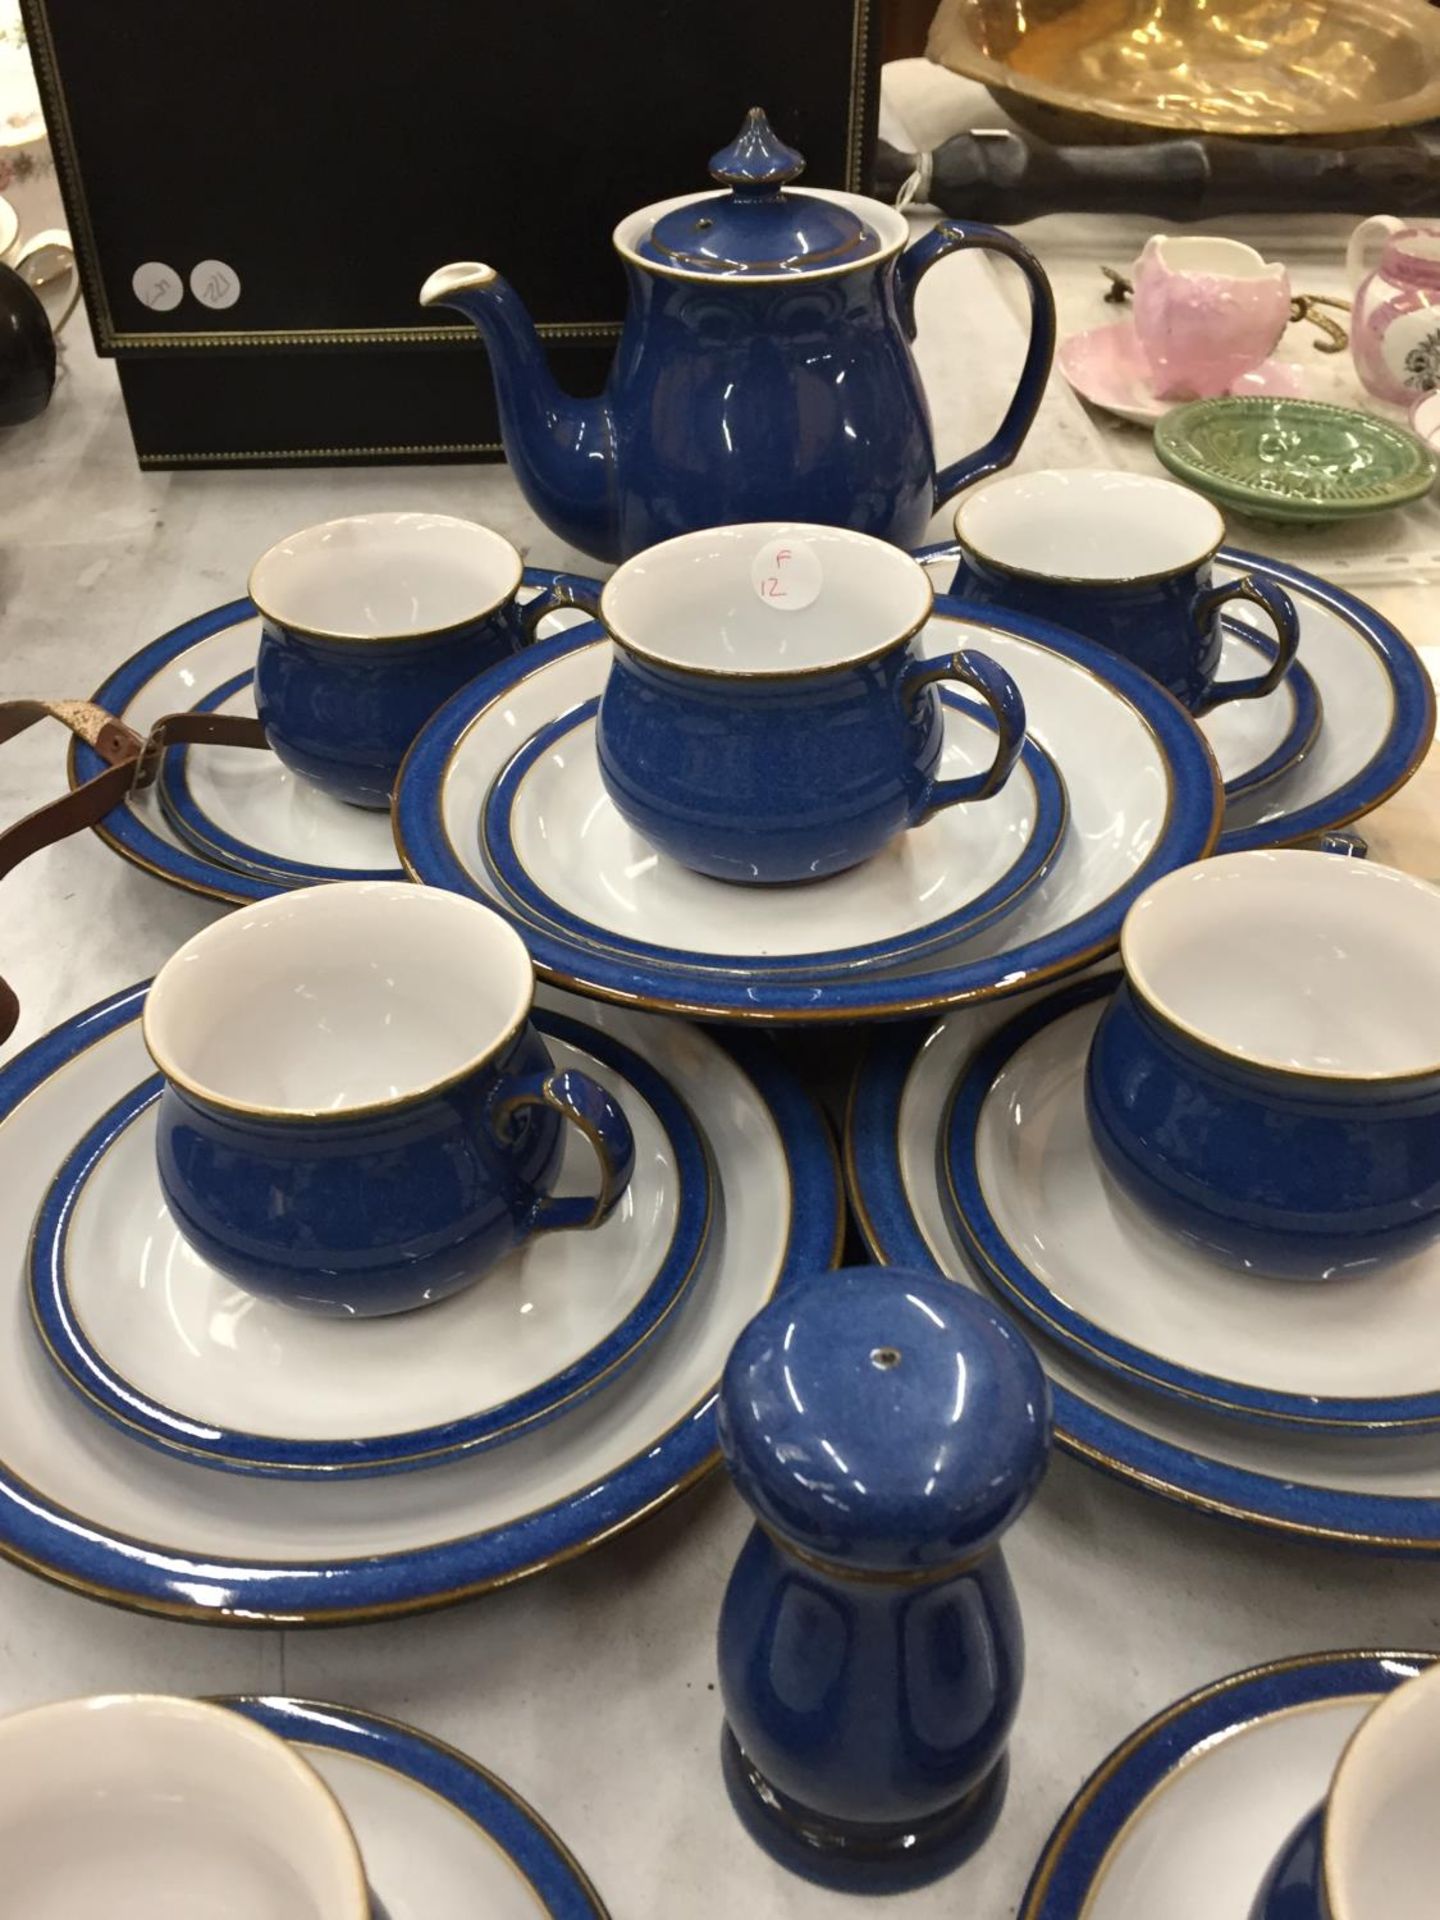 A BLUE DENBY TEASET TO INCLUDE A TEAPOT, BOWLS, CUPS, SAUCERS, ETC - 25 PIECES IN TOTAL - Image 4 of 4